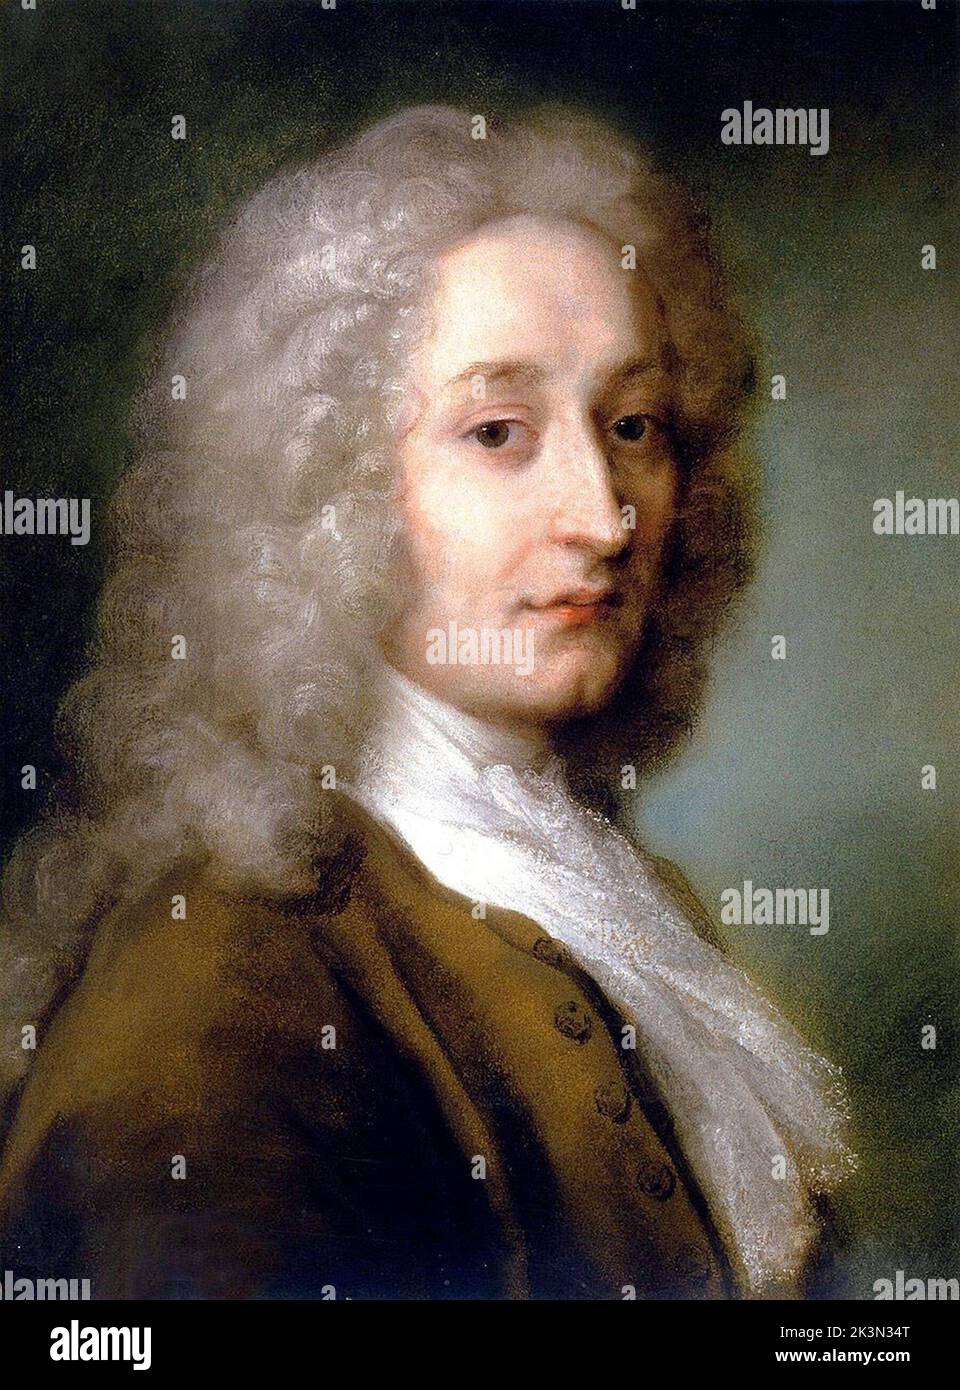 Jean-Antoine Watteau (UK: /ˈwɒtoʊ/, US: /wɒˈtoʊ/,[2][3] French: [ʒɑ̃ ɑ̃twan vato]; baptised October 10, 1684 – died July 18, 1721)[4] was a French painter and draughtsman whose brief career spurred the revival of interest in colour and movement, as seen in the tradition of Correggio and Rubens. He revitalized the waning Baroque style, shifting it to the less severe, more naturalistic, less formally classical, Rococo. Watteau is credited with inventing the genre of fêtes galantes, scenes of bucolic and idyllic charm, suffused with a theatrical air. Some of his best known subjects were drawn fro Stock Photo